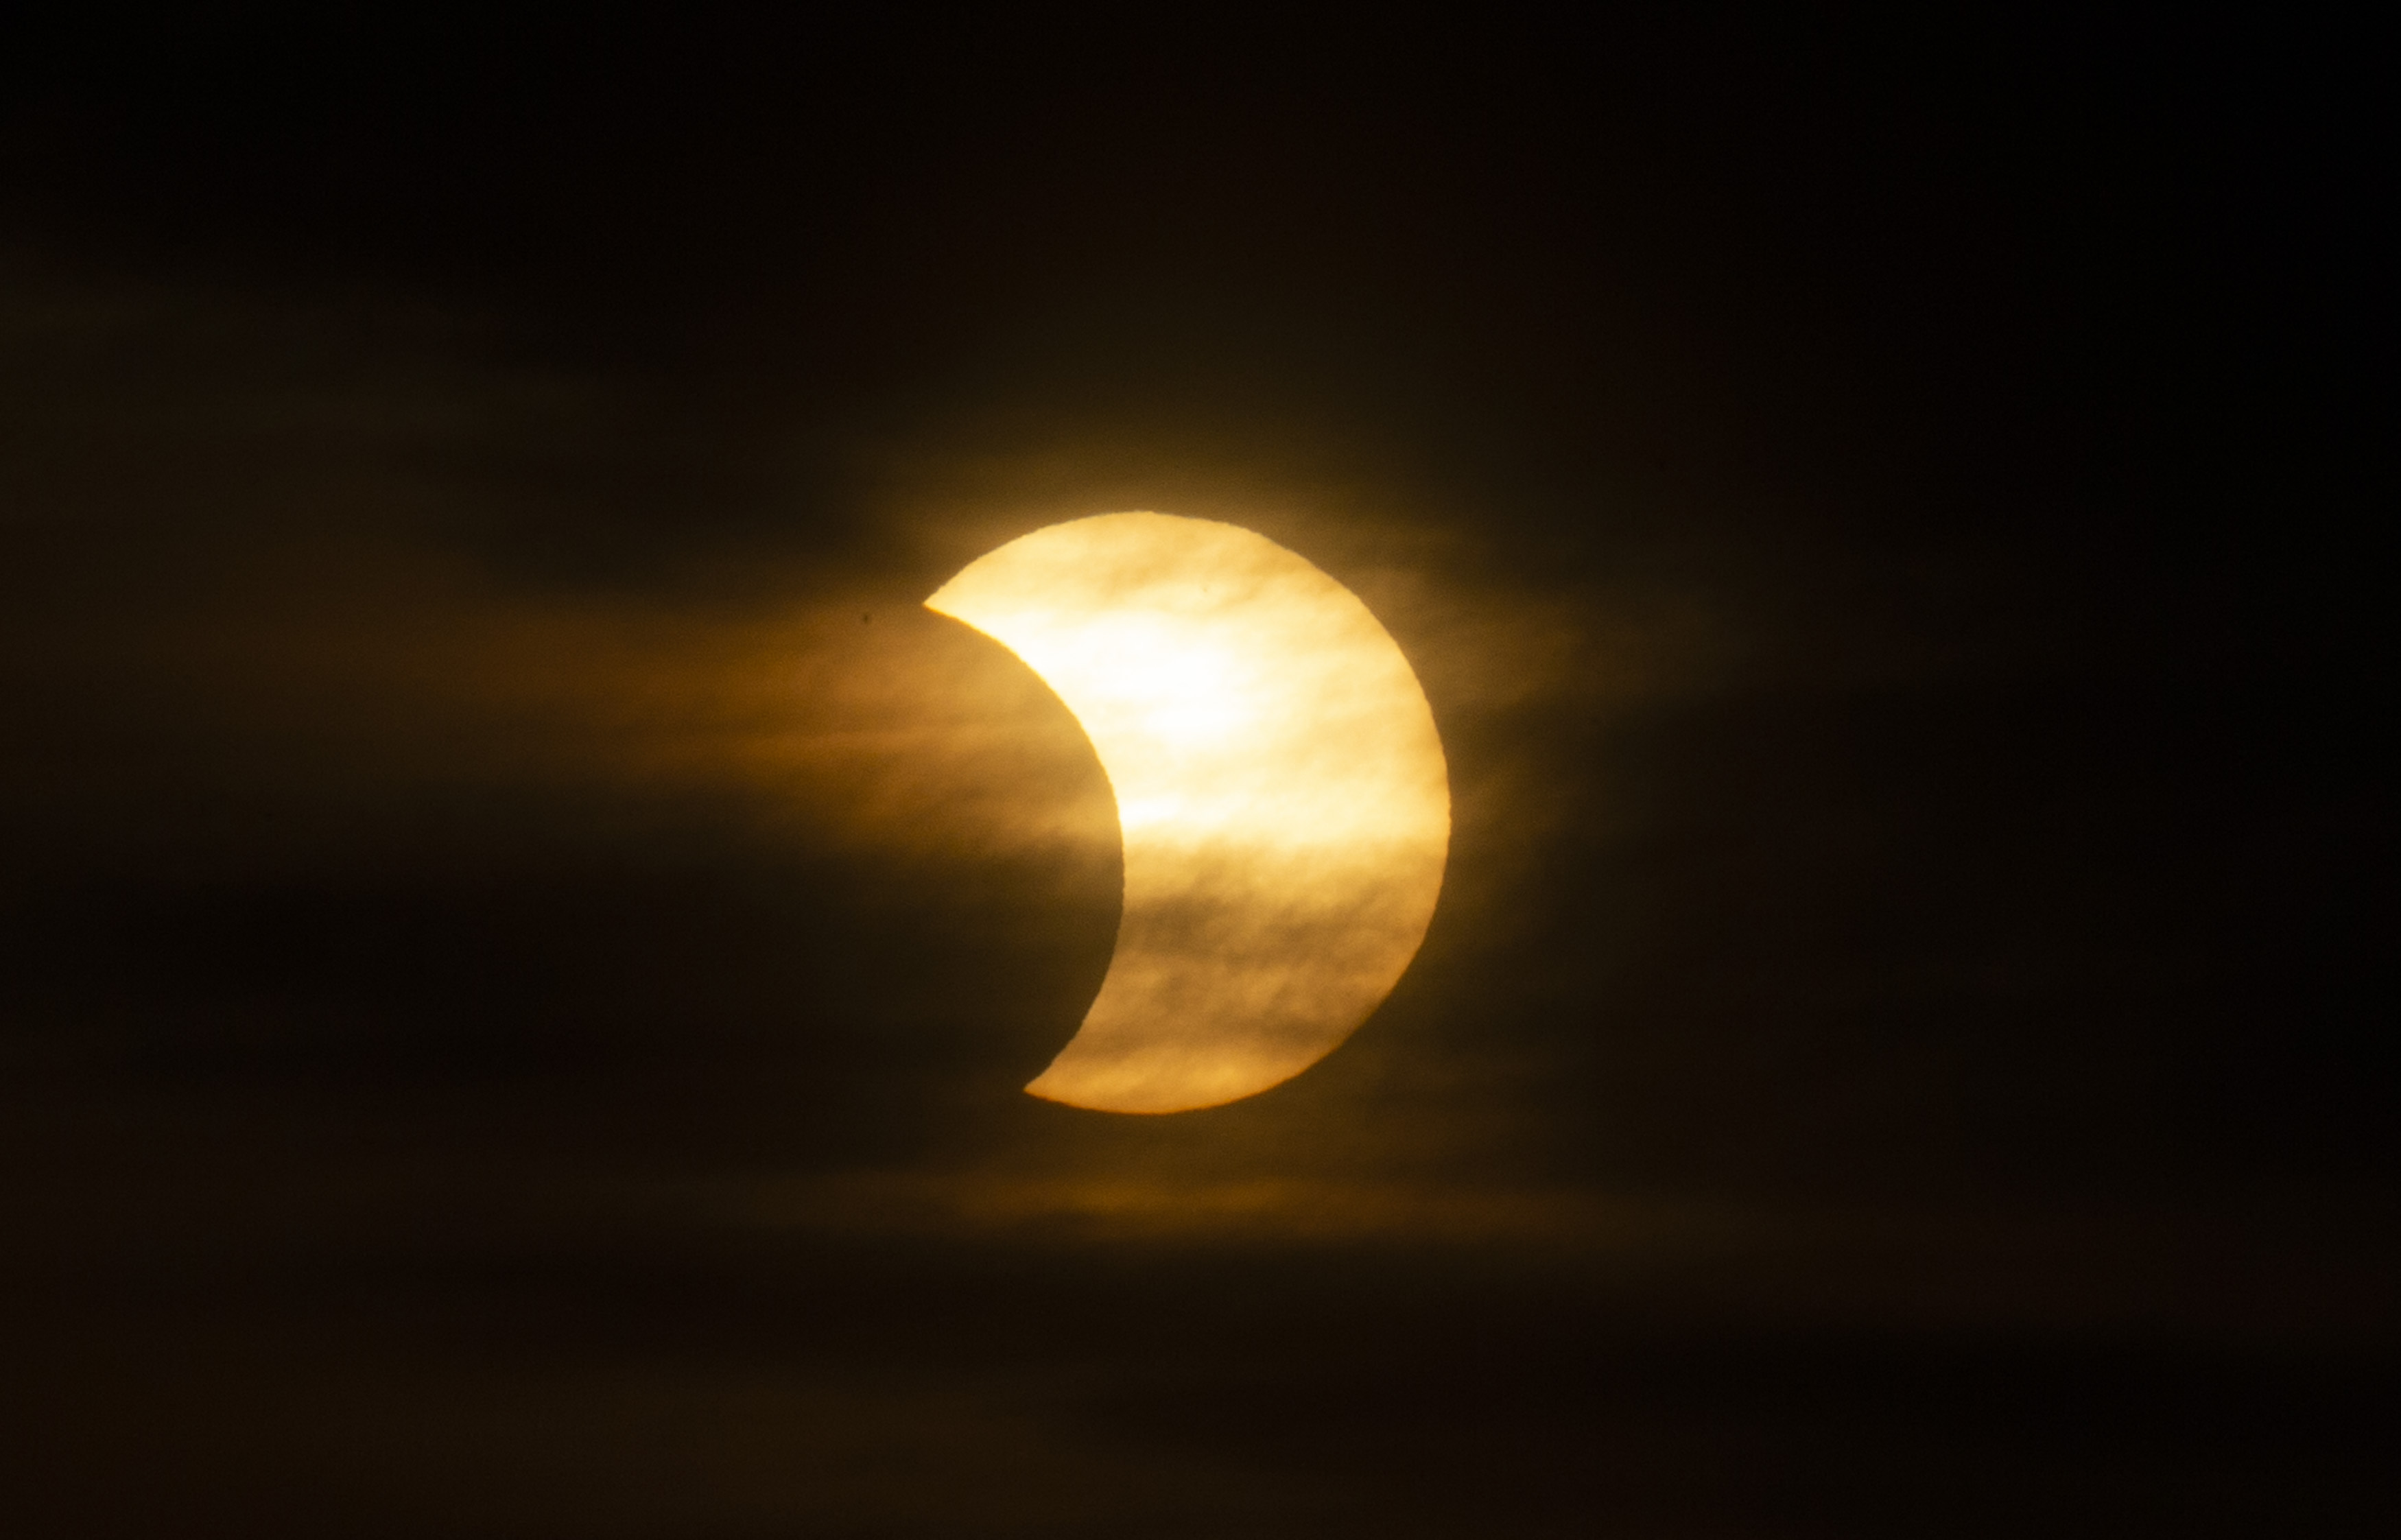 A new solar eclipse will occur in 2022 and 2023 (Photo by Kina Bettencourt / AFP)